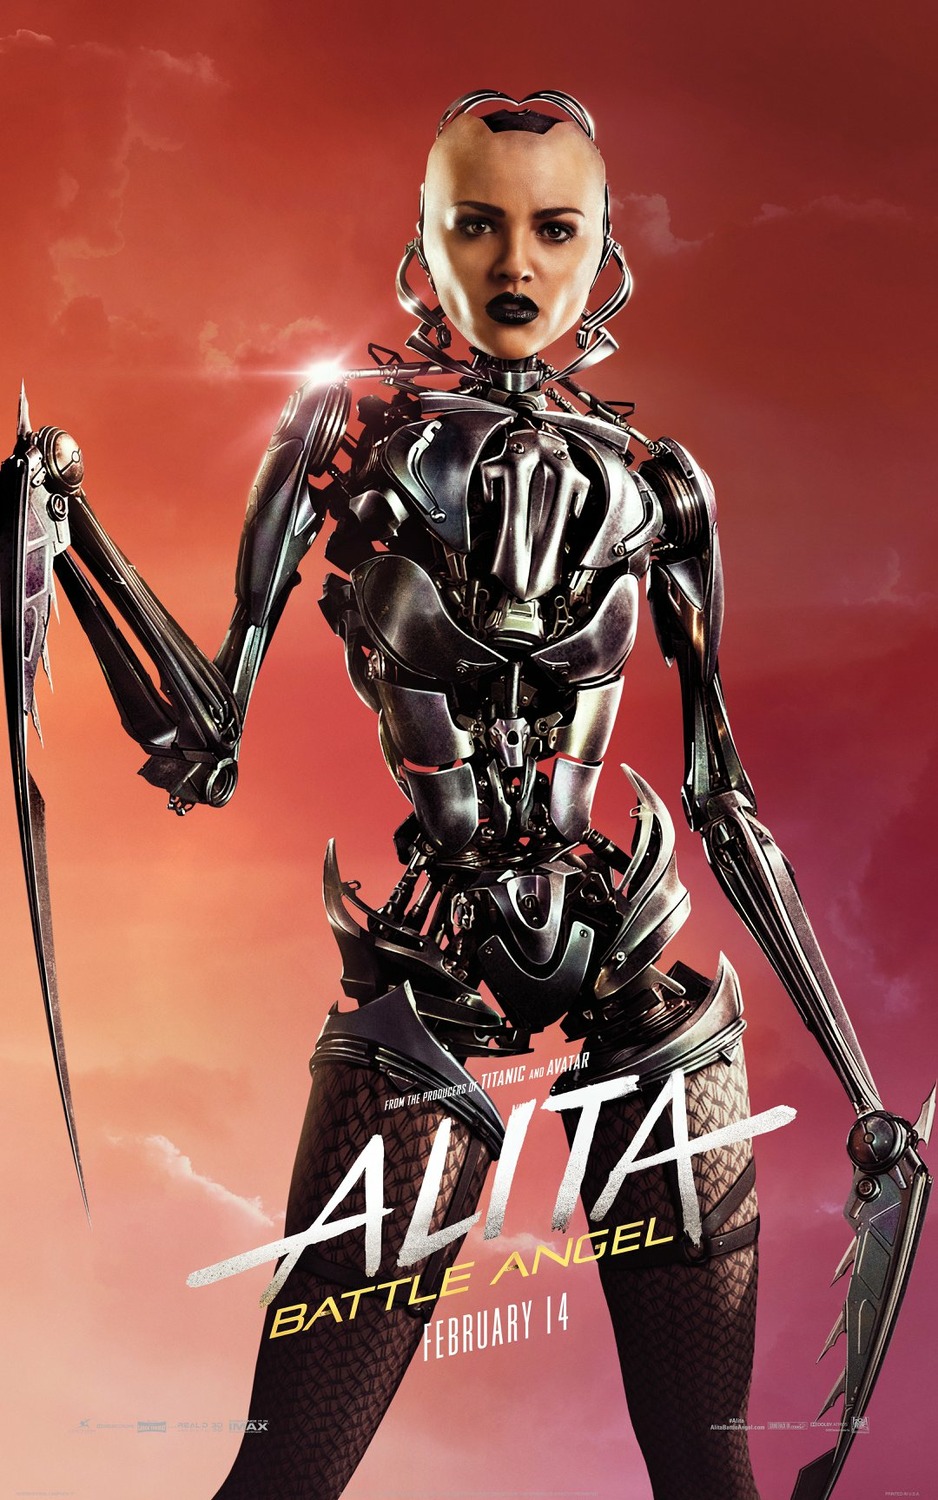 Extra Large Movie Poster Image for Alita: Battle Angel (#8 of 31)